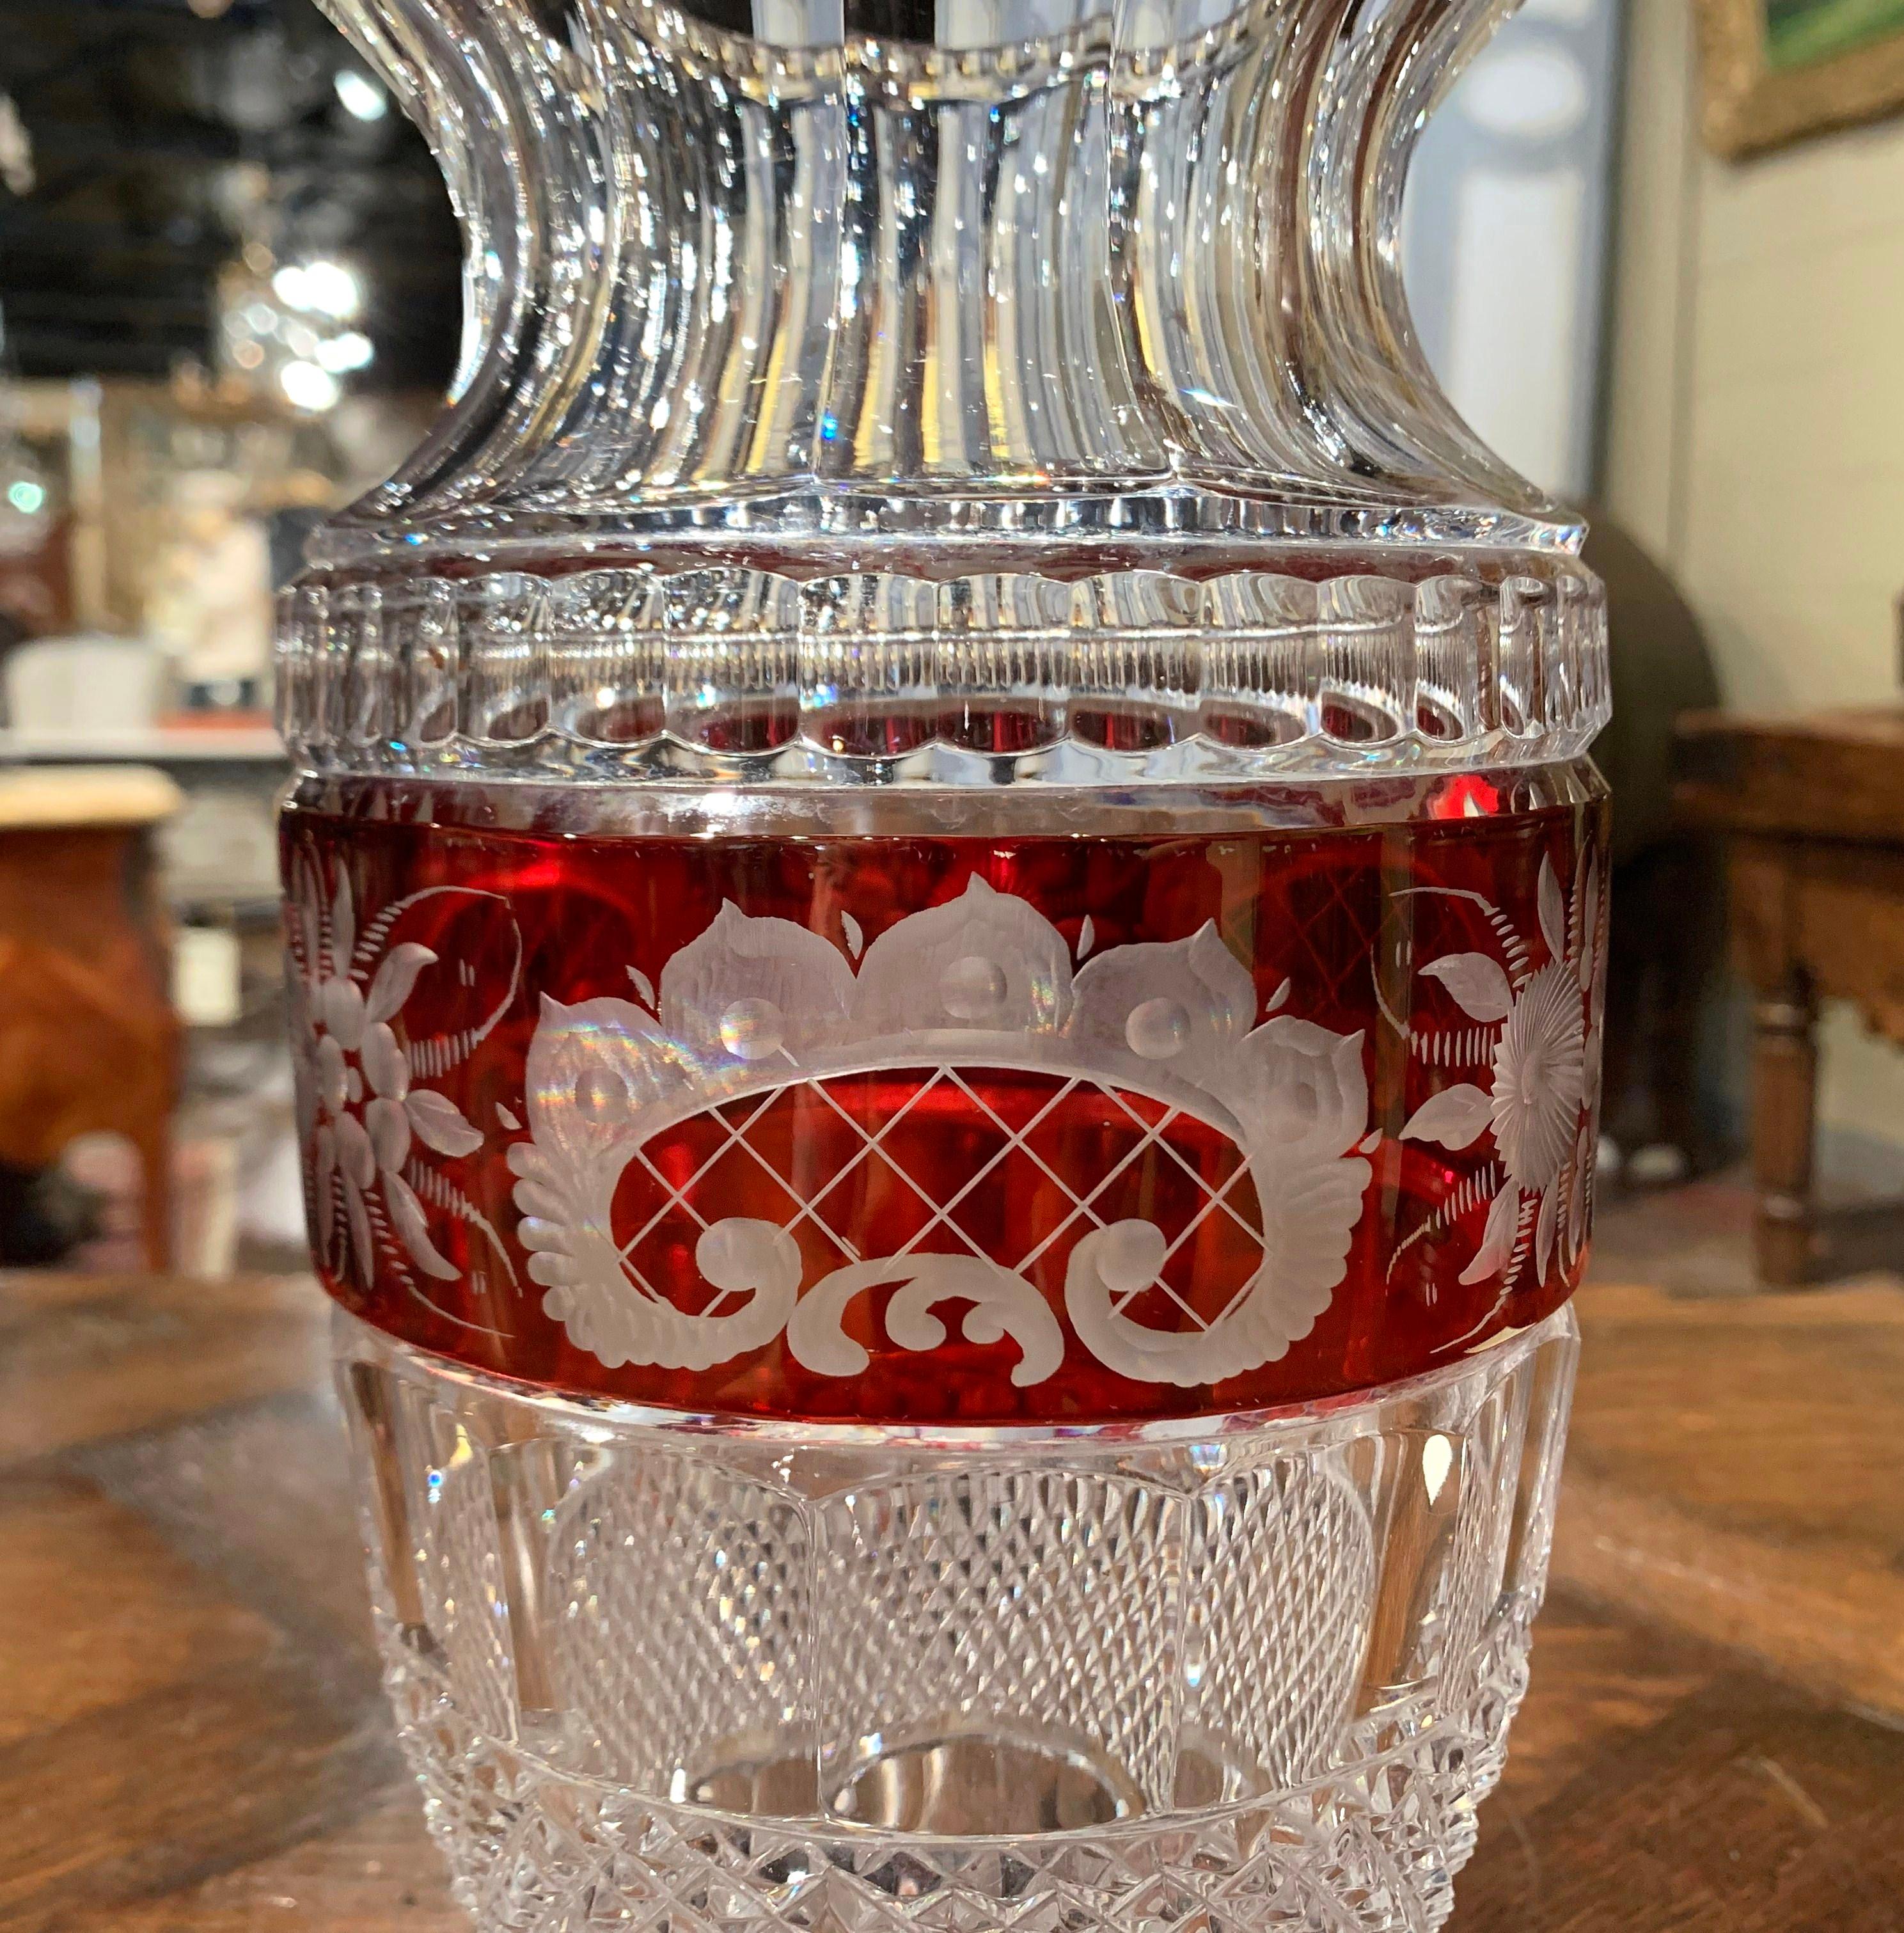 Etched Midcentury French Cut-Glass Vase with Red Floral Motifs Saint Louis Style